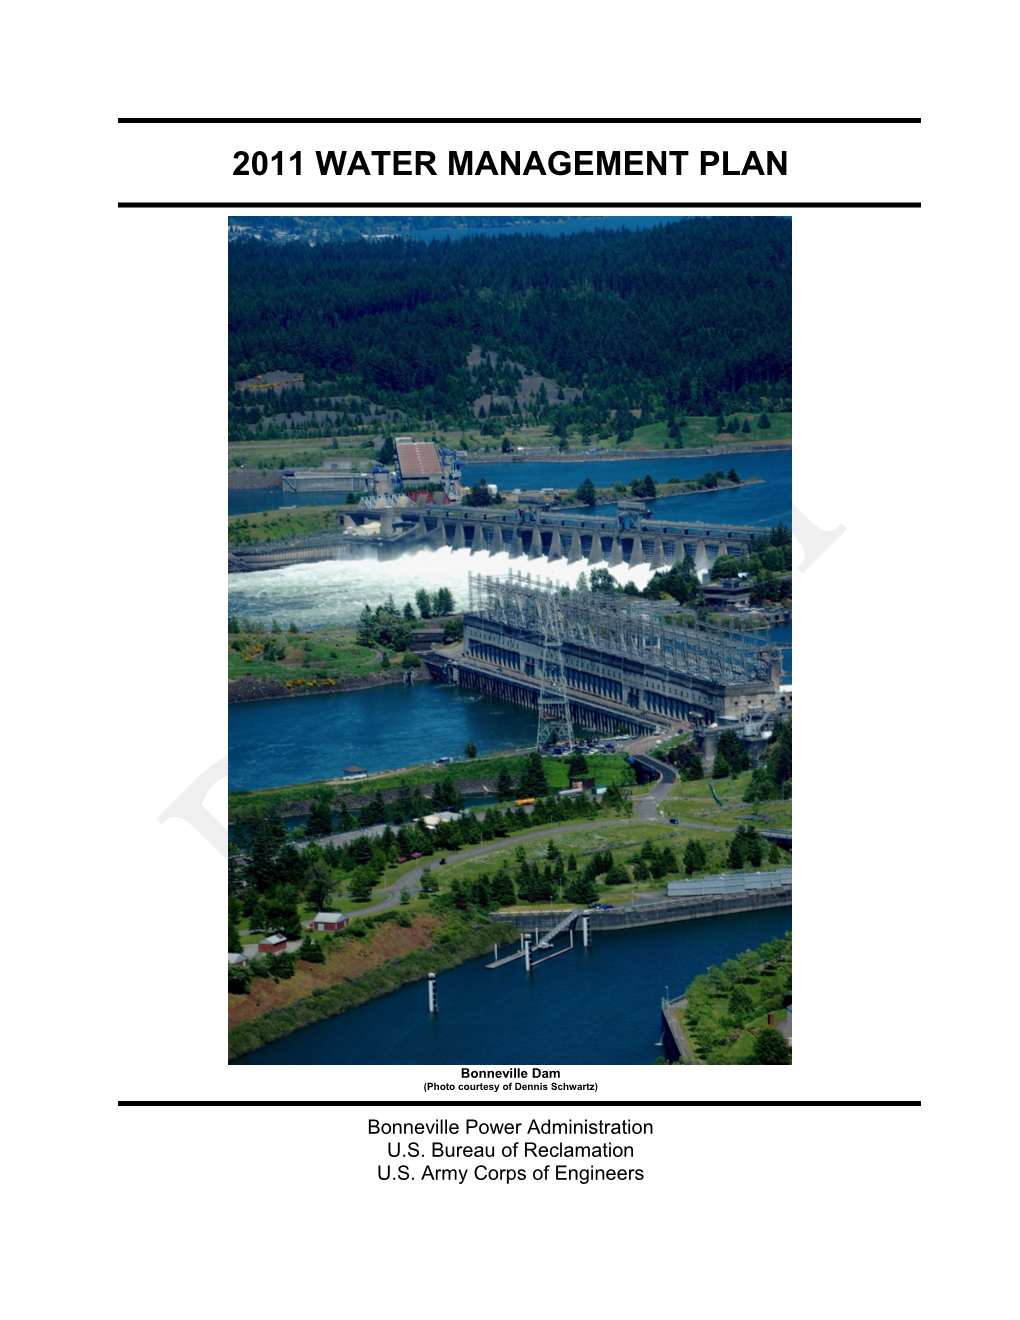 20101207 Updated Draft 2011 Water Management Plan with Comments from USFWS, IDFG, and BPA